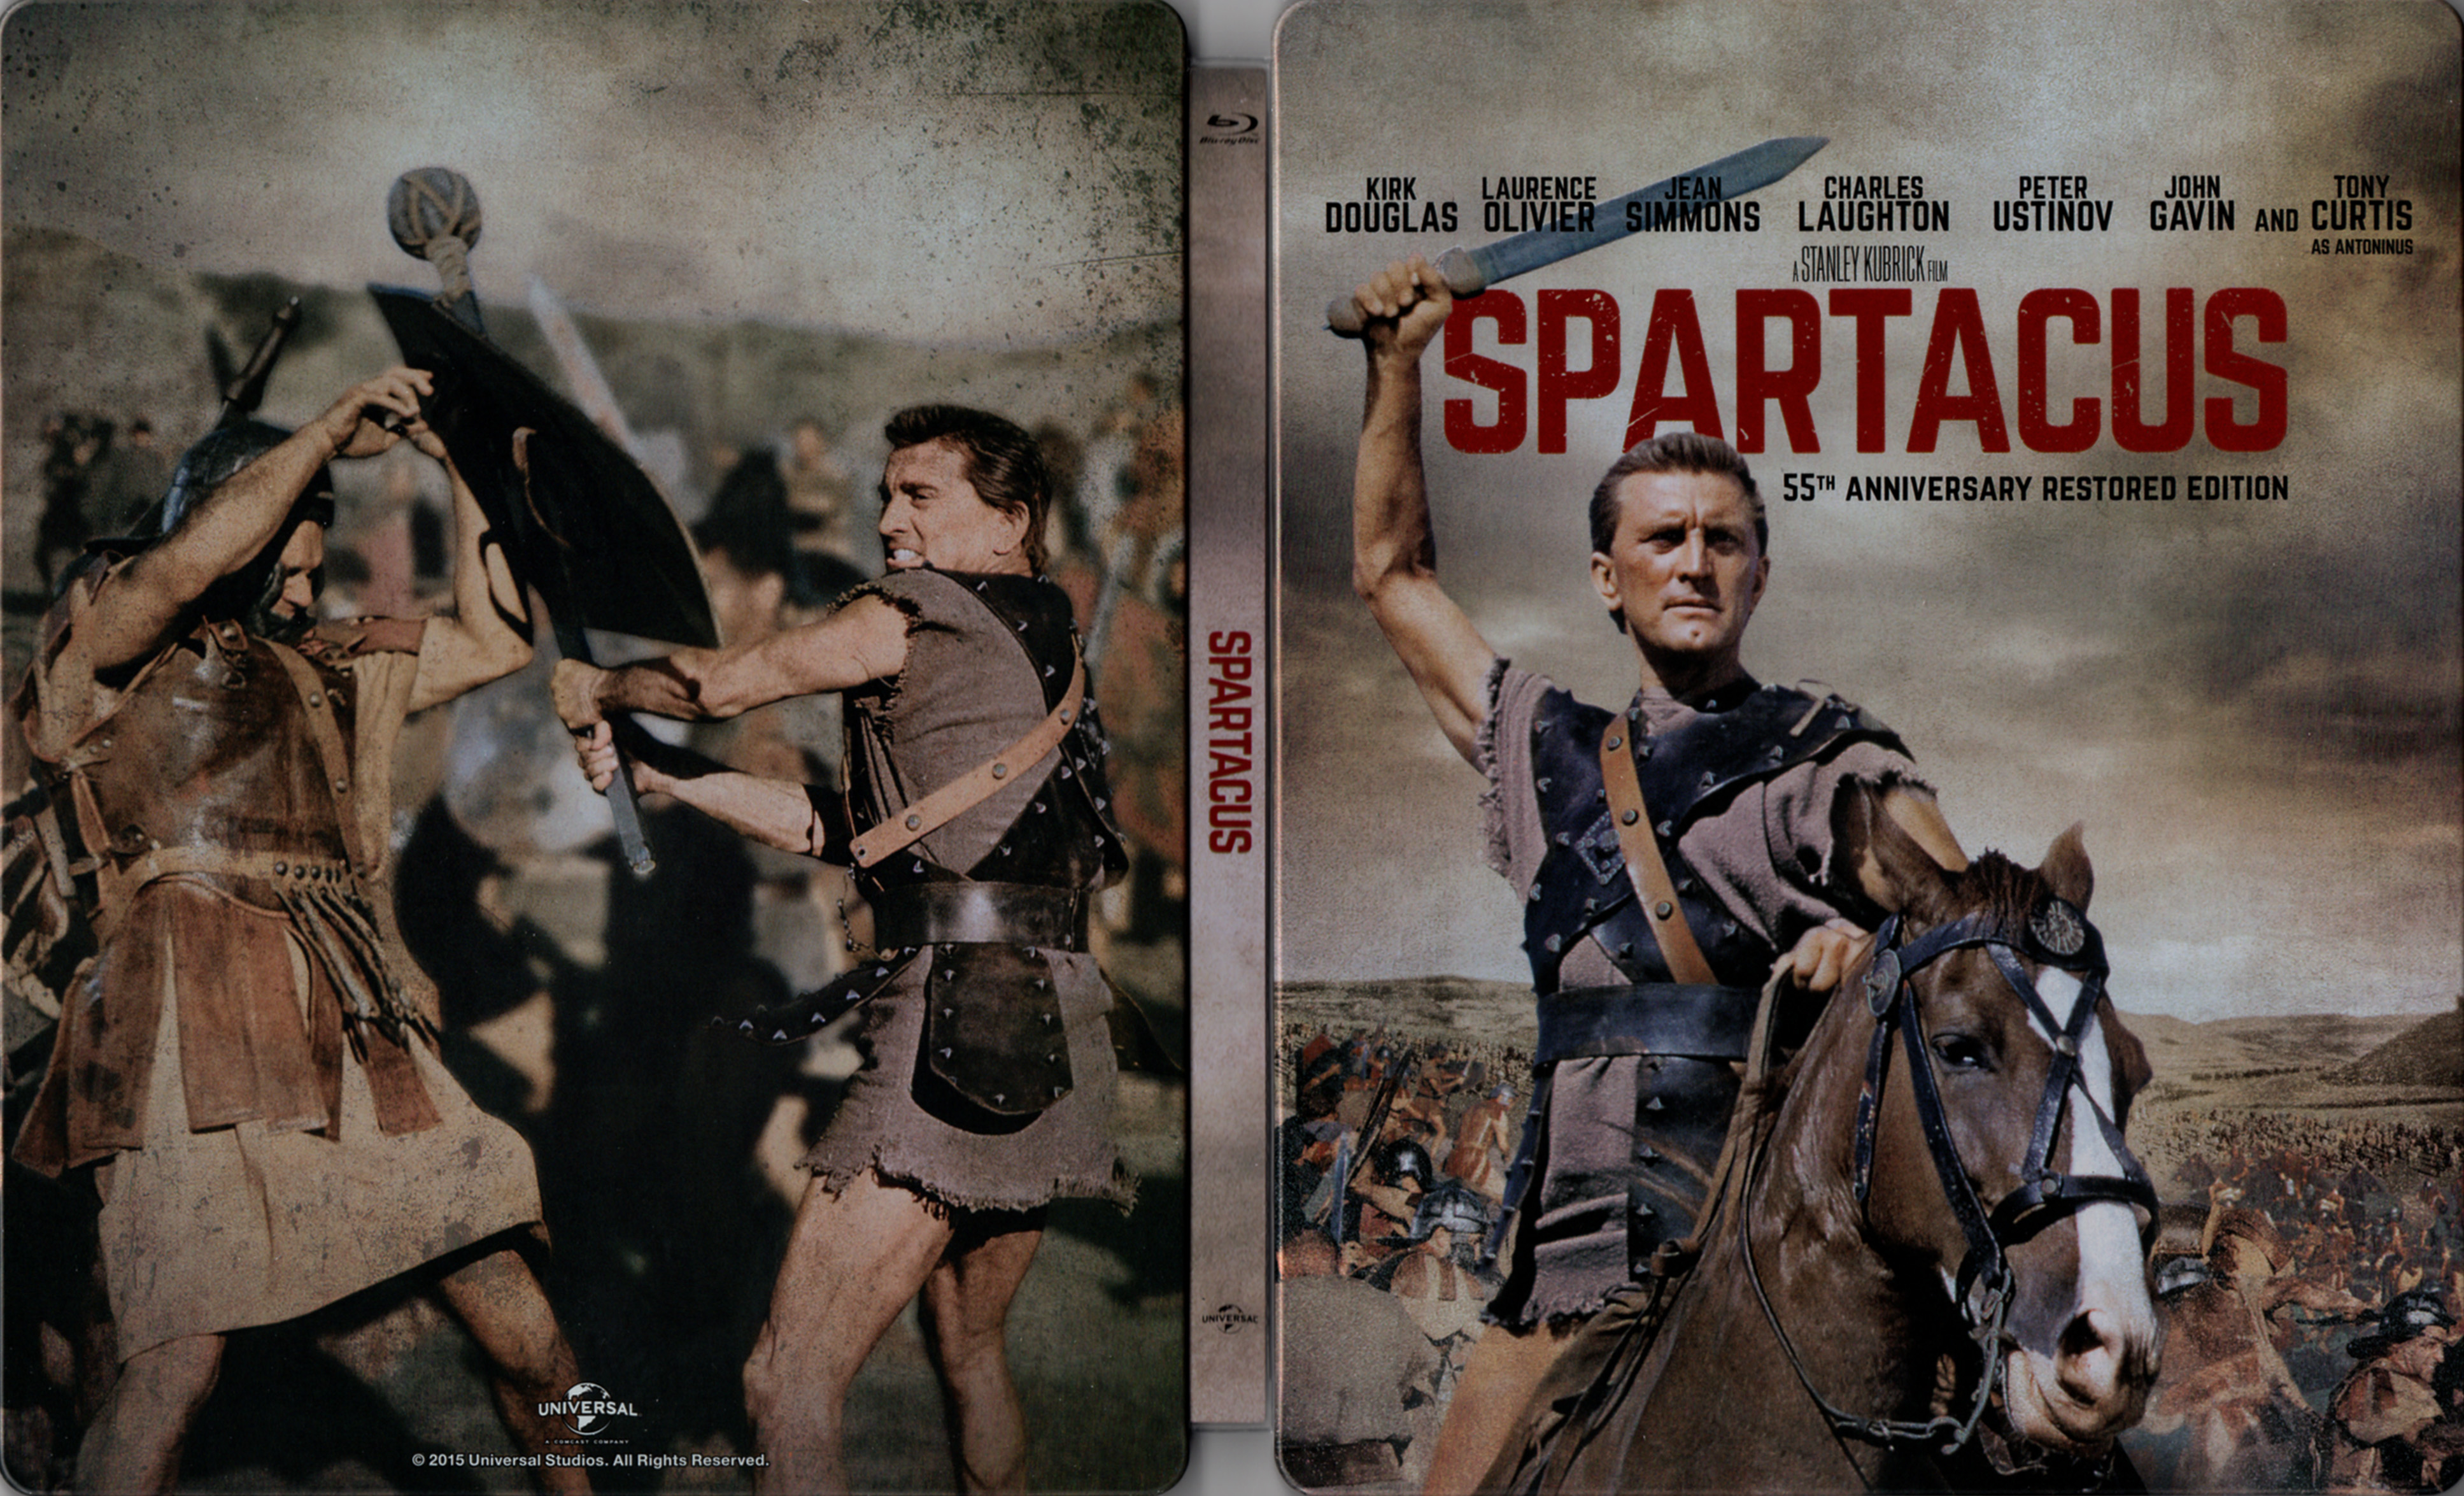 Jaquette DVD Spartacus (BLU-RAY) v2